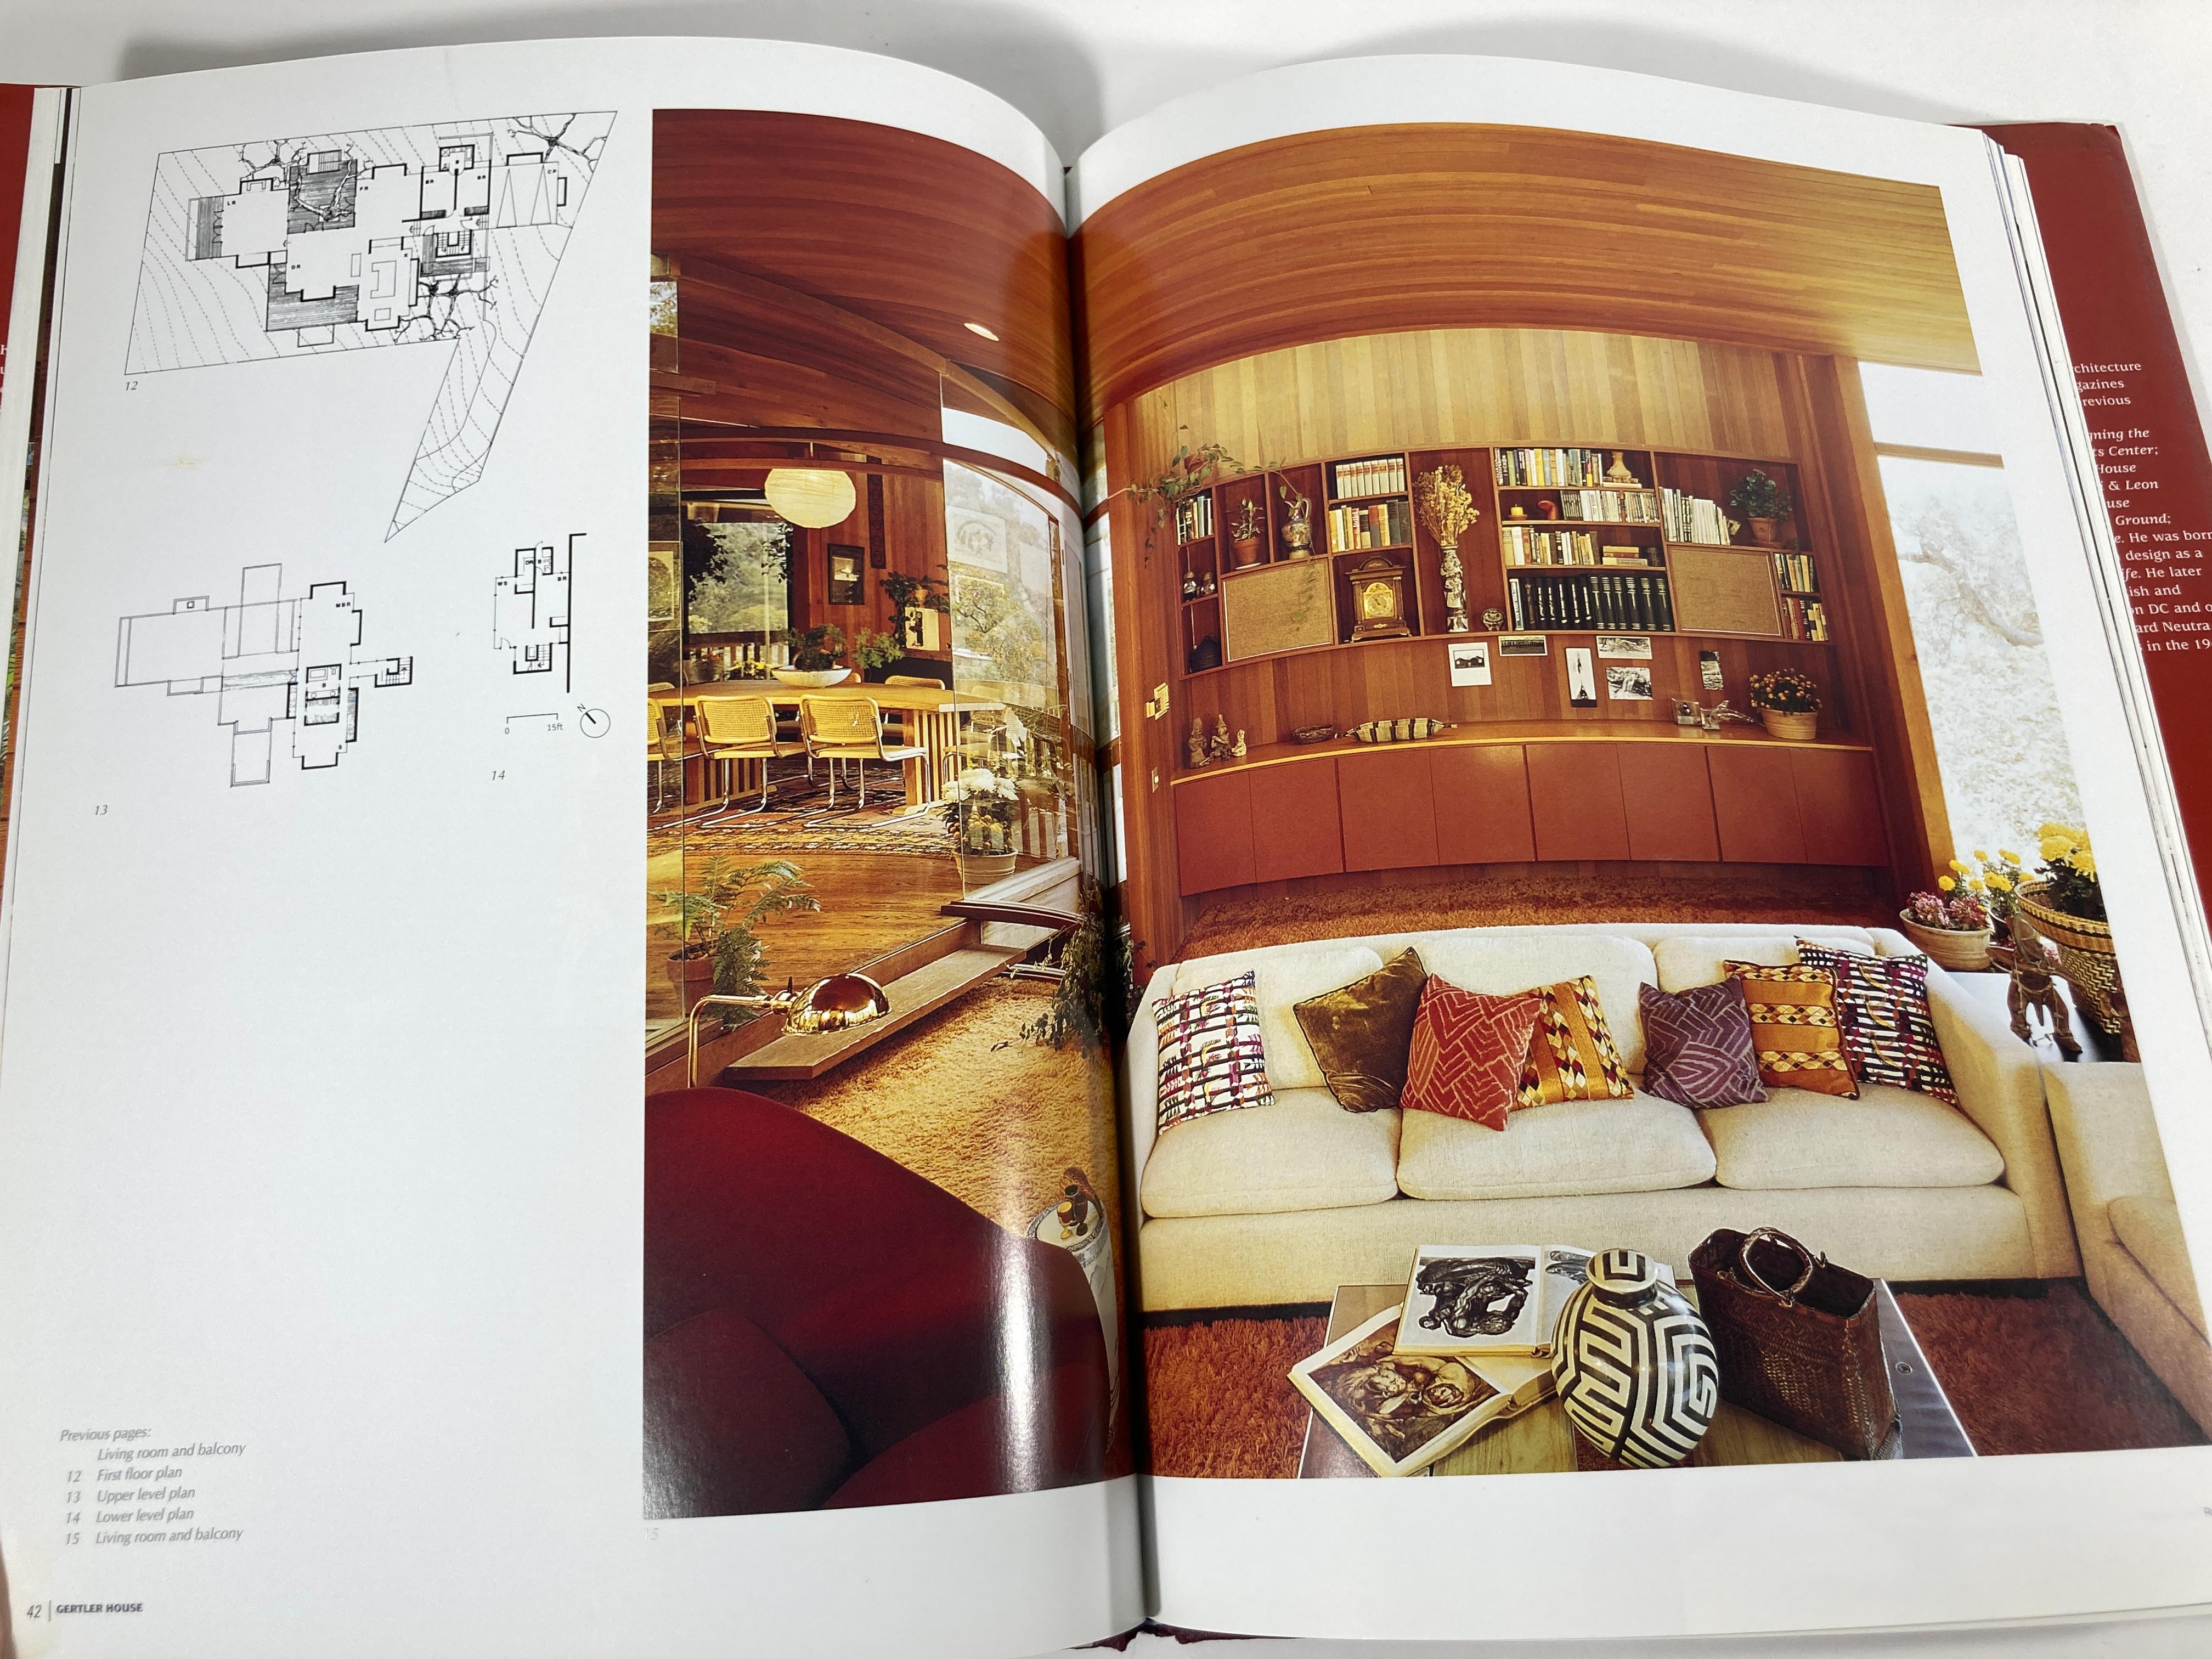 House Design By Ray Kappe: Architects/Planners, Themes And Variations # 3 Book 2